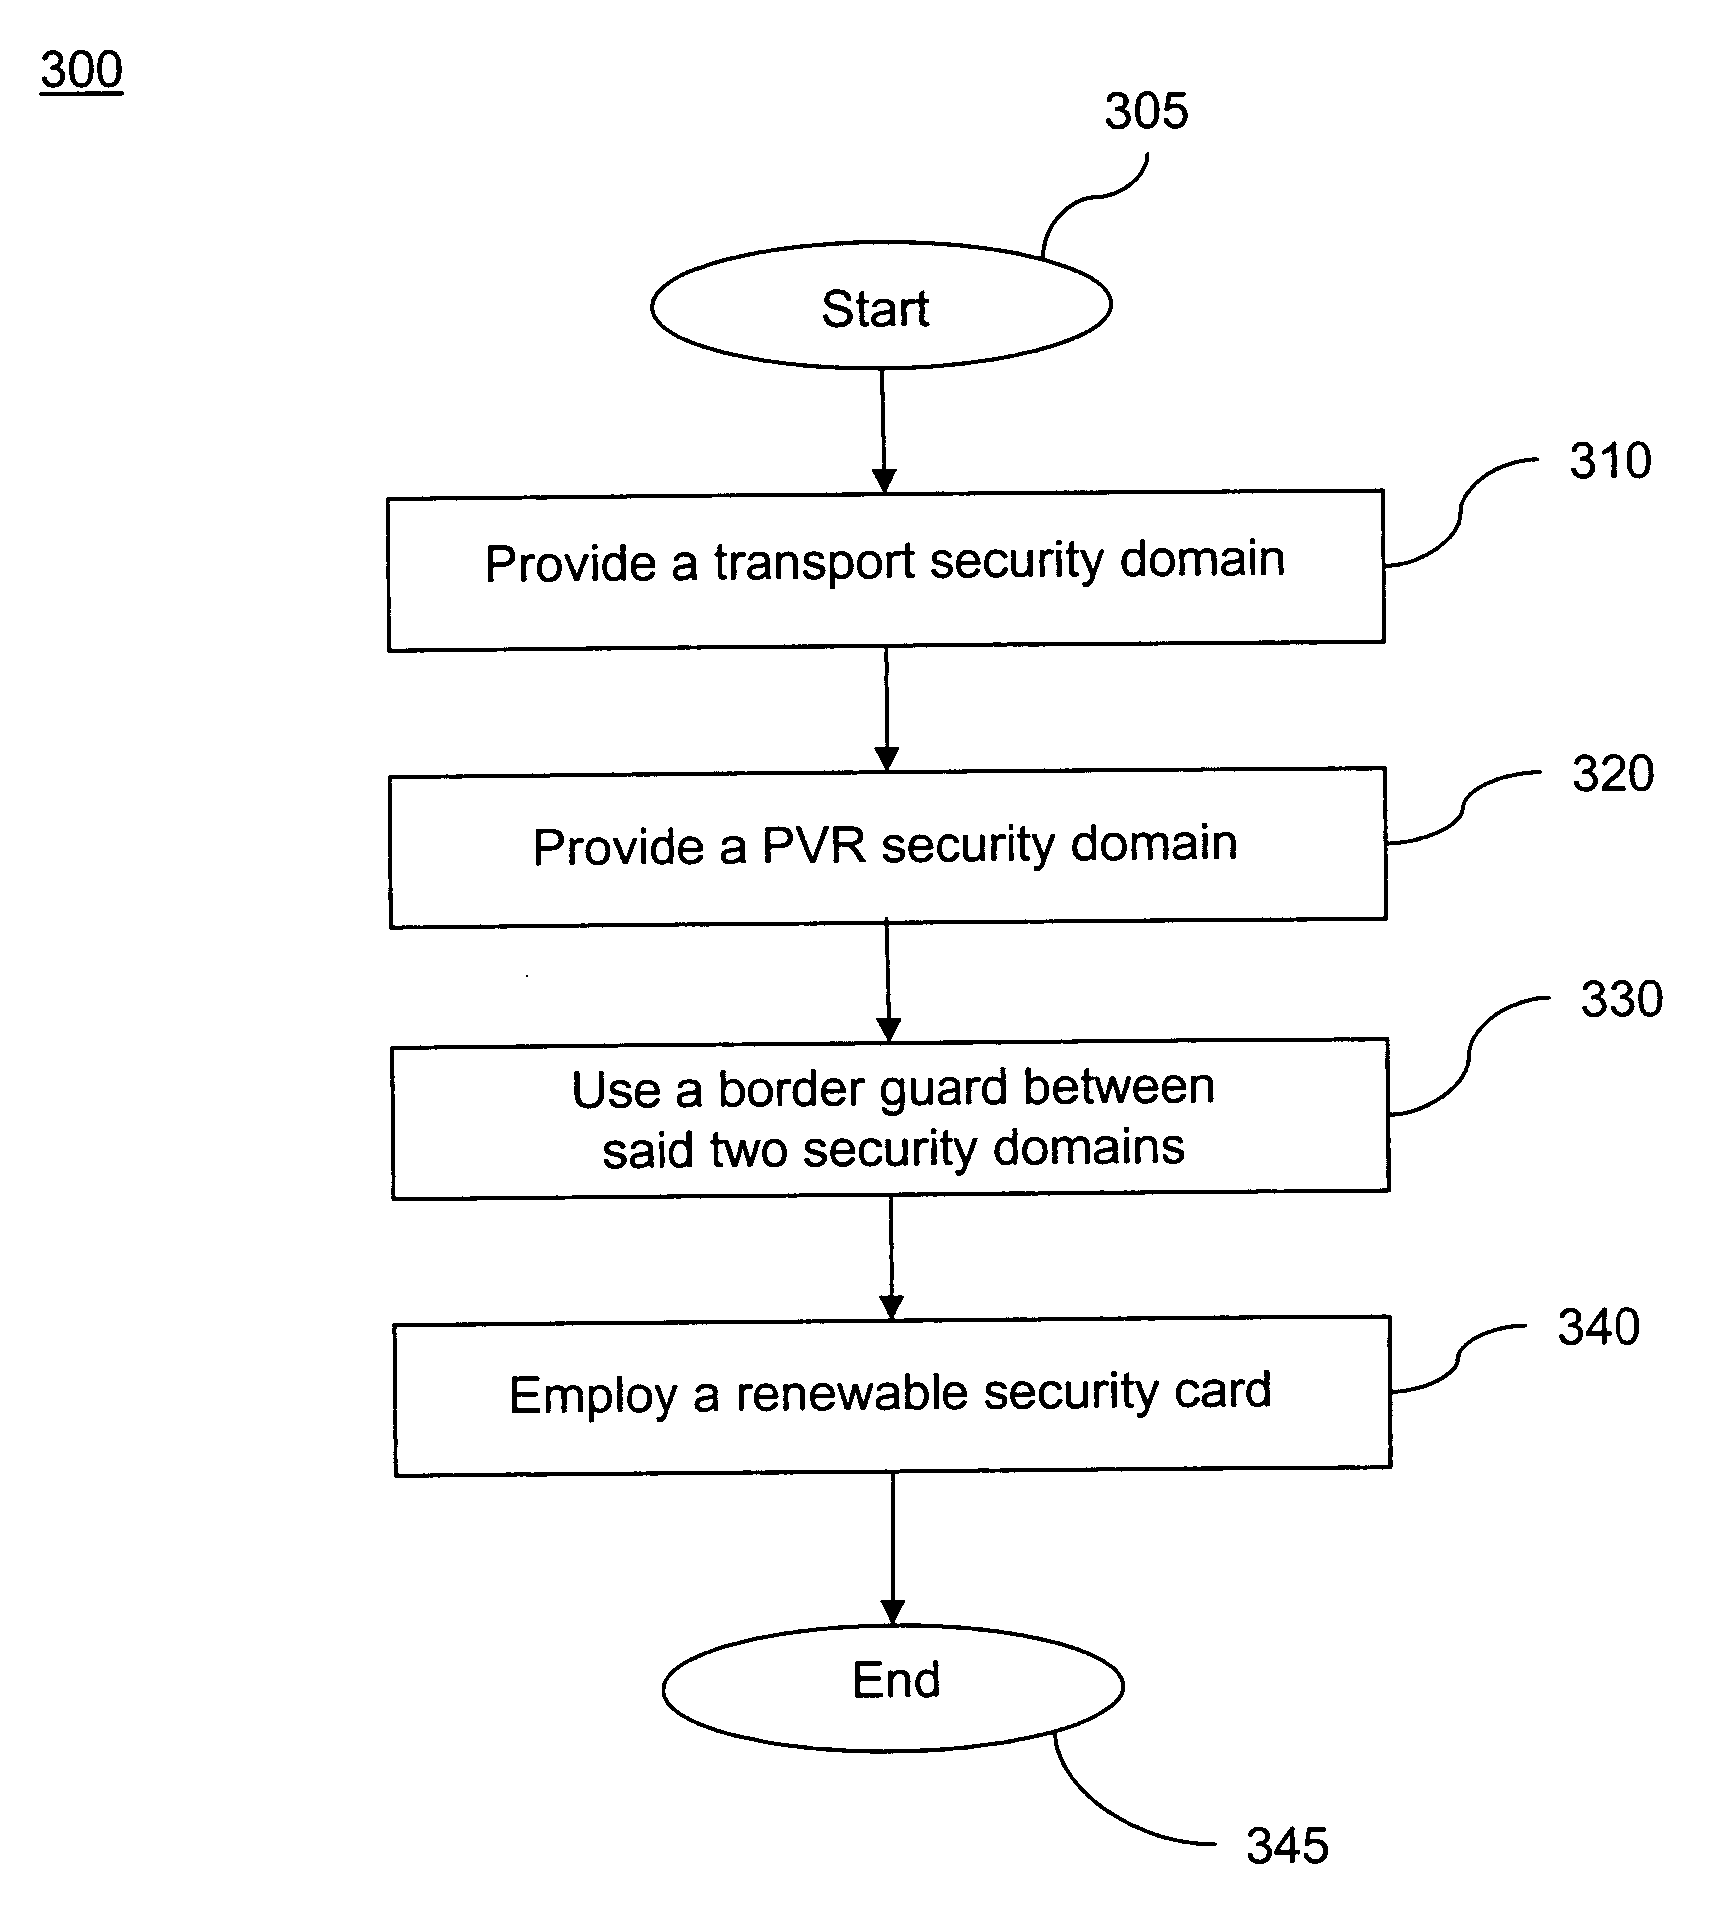 Method and apparatus for providing a border guard between security domains